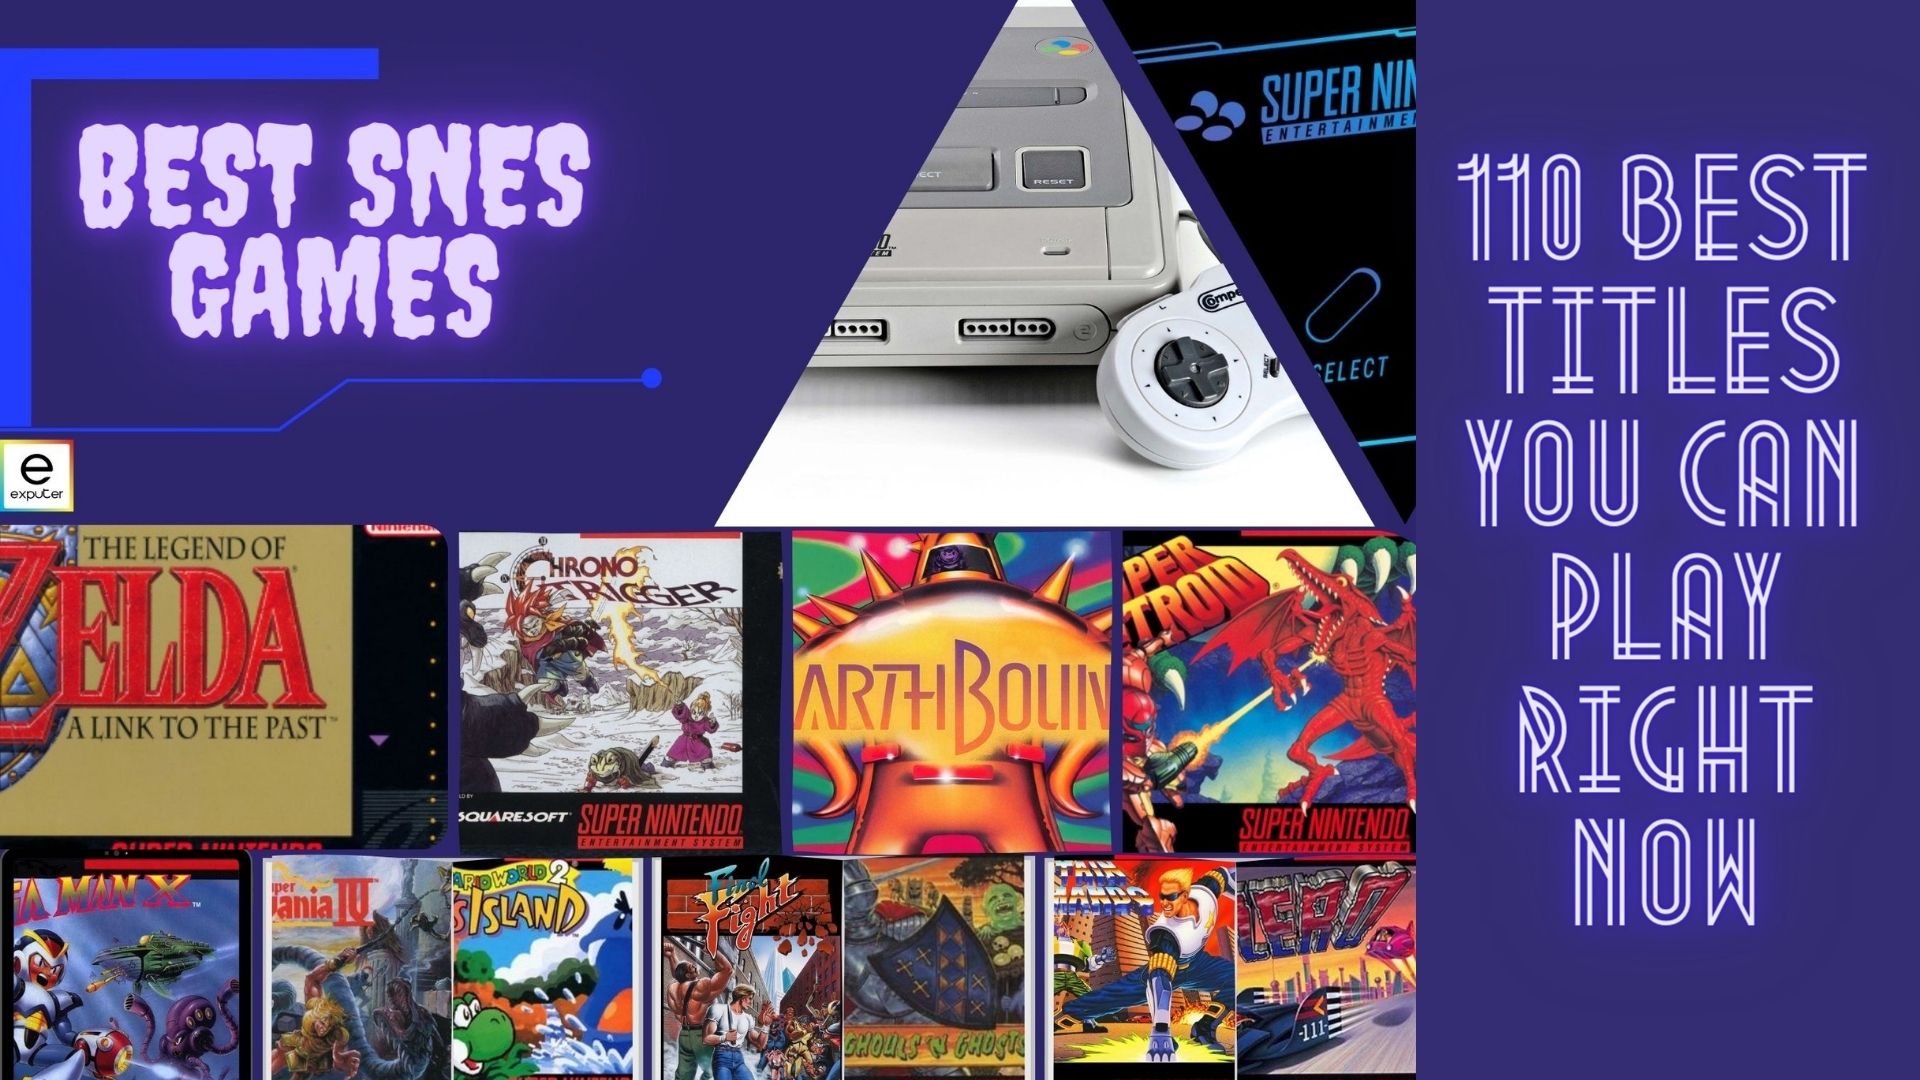 Top 110 BEST SNES Games of All Time 